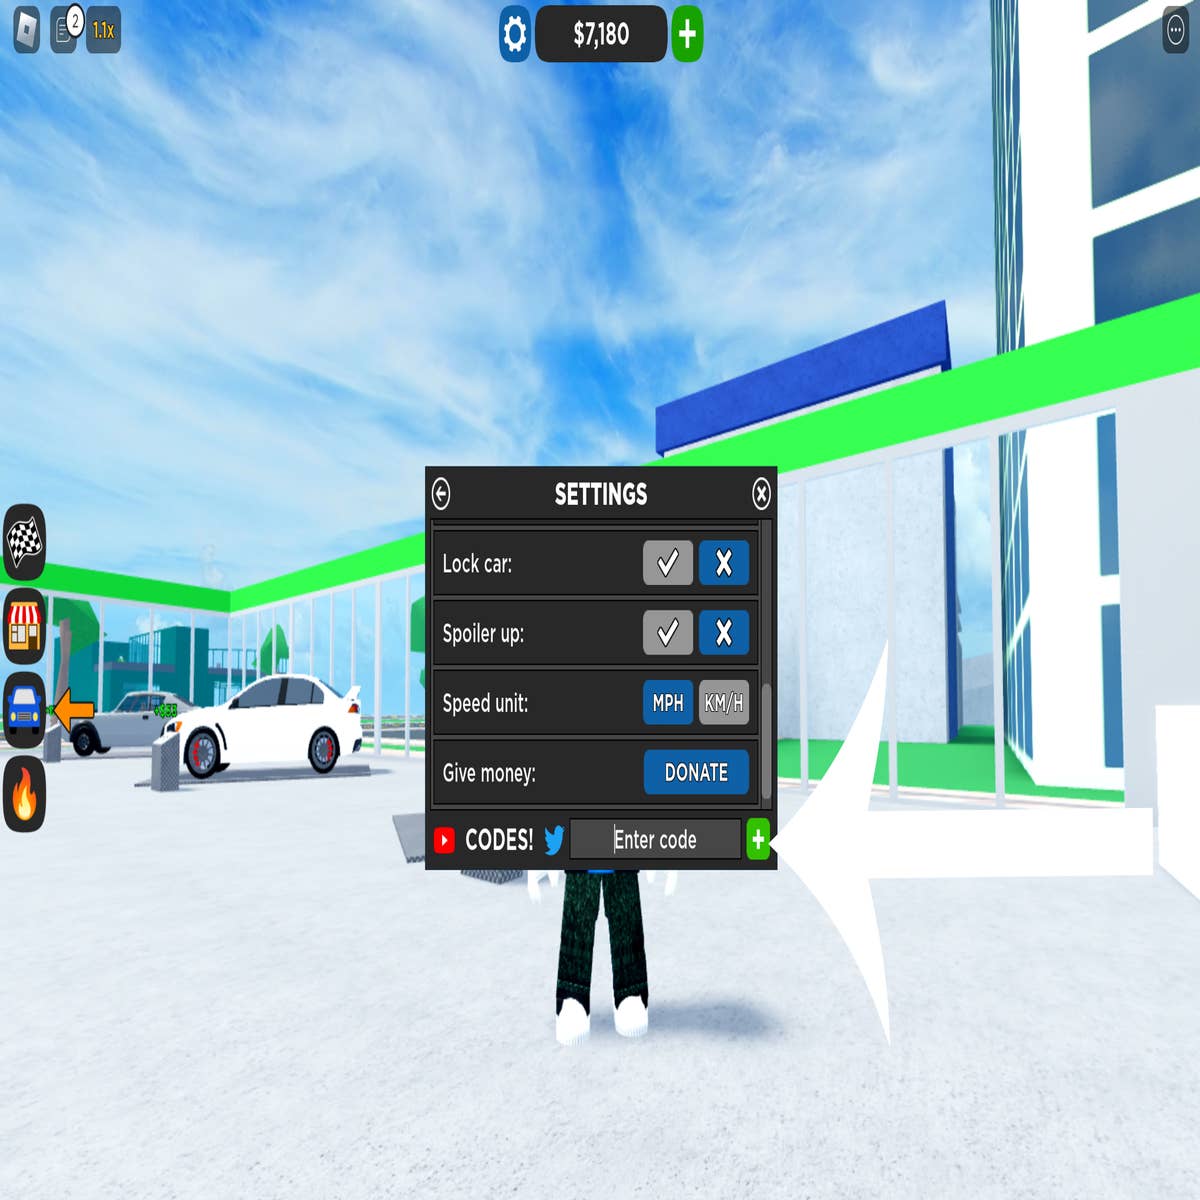 NEW INTERIORS!!! + 5 New Cars + New Code in Car Dealership Tycoon!!, Car  Dealership Tycoon